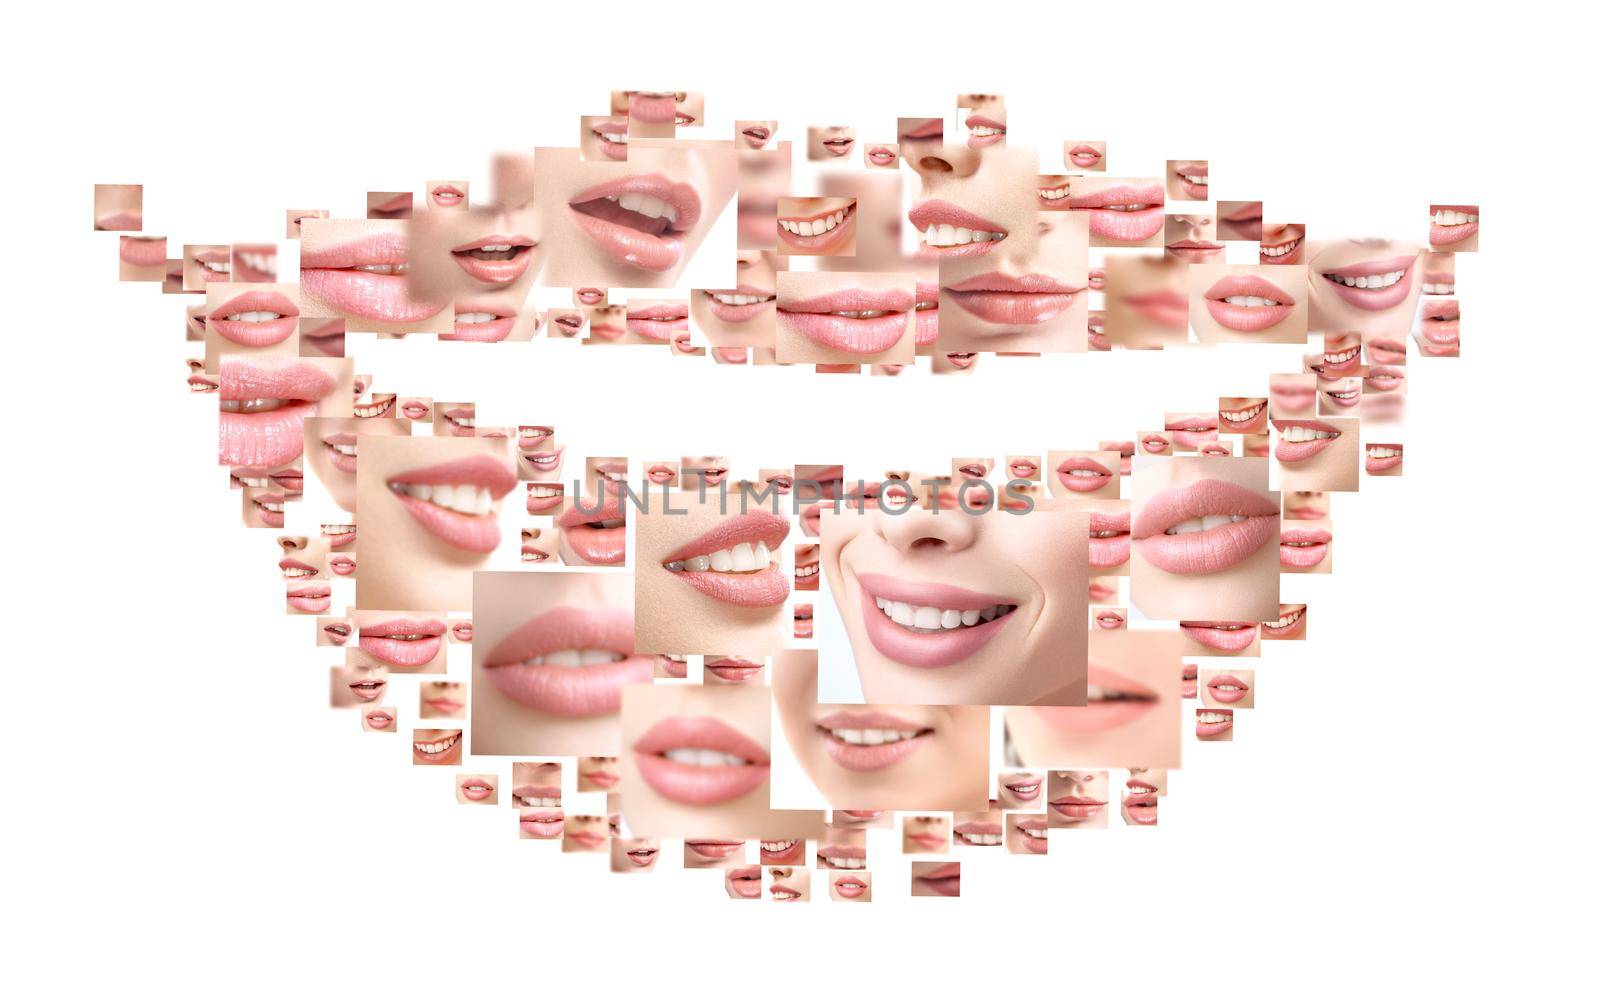 Lips of smiles. Collection of many beautiful female smiles with perfect healthy white teeth in shape of human smile mouth or lips dental dentistry oral mouth teeth healthcare whitening bleaching